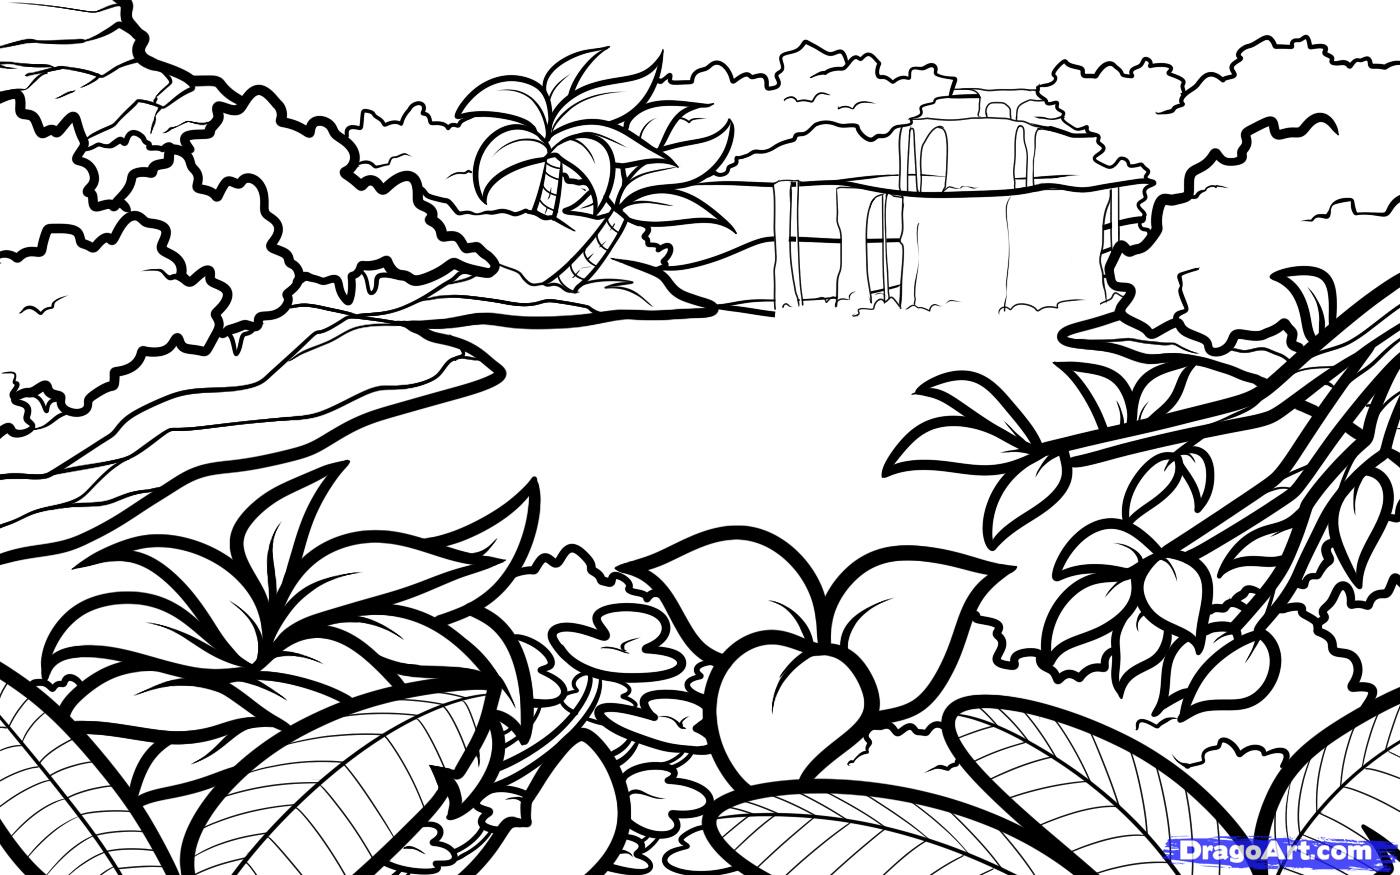 how-to-draw-a-lagoon-step-8_1_000000089543_5